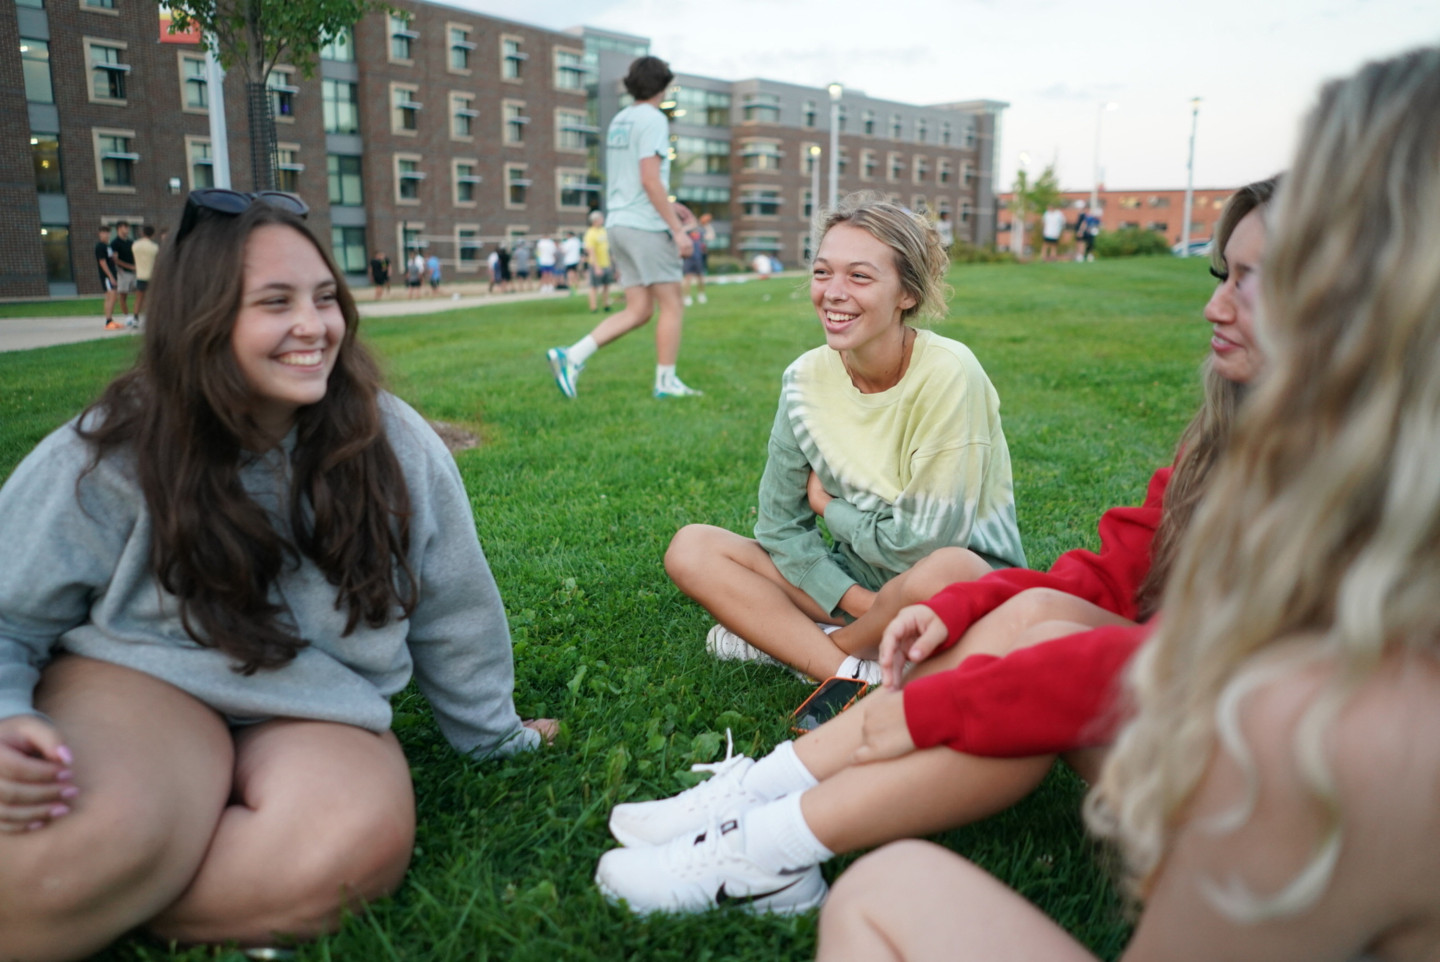 Students sit together on the grass.